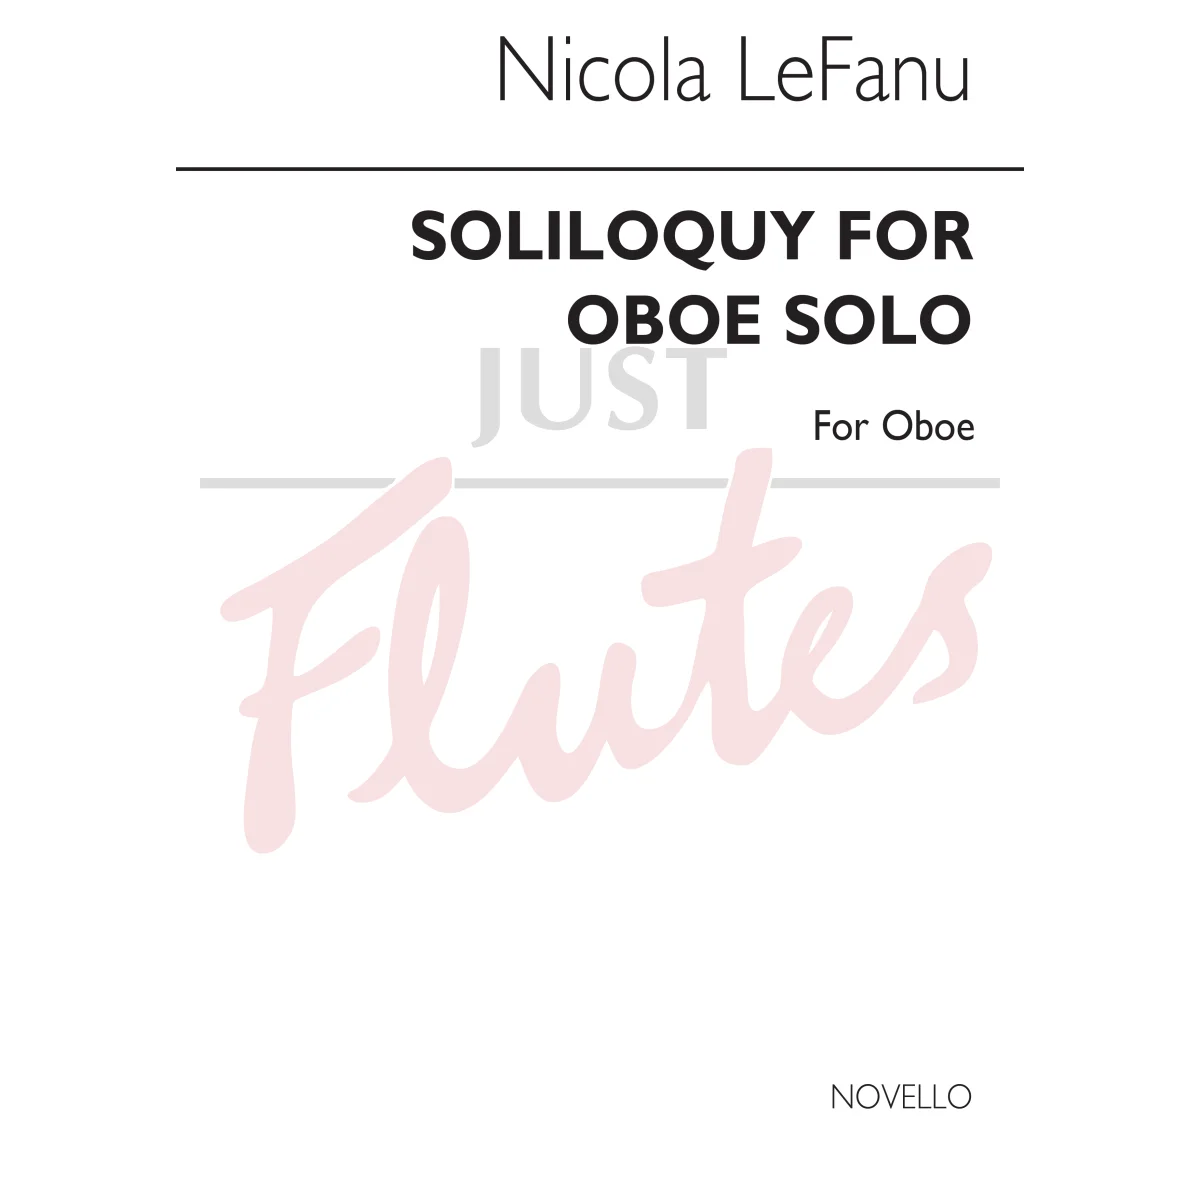 Soliloquy for Oboe